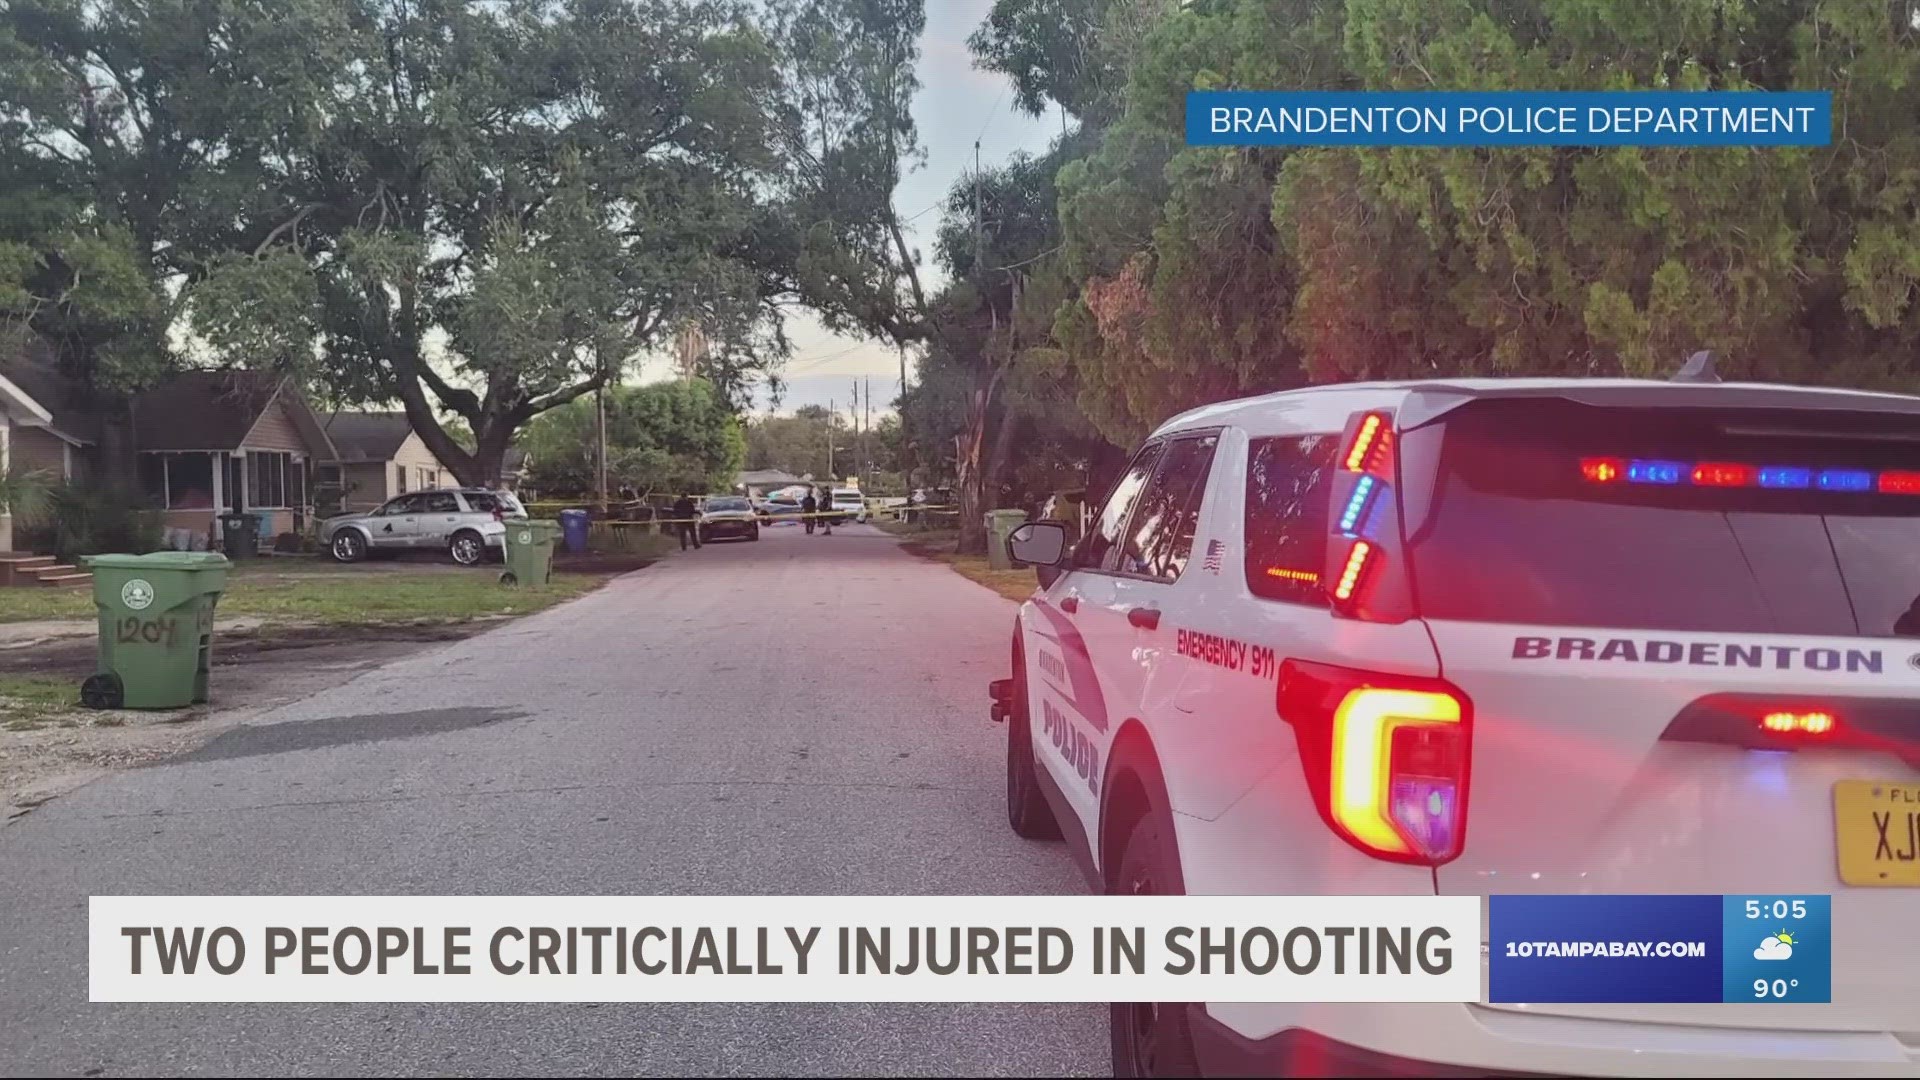 The shooting happened Monday morning in a neighborhood near Tamiami Trail.